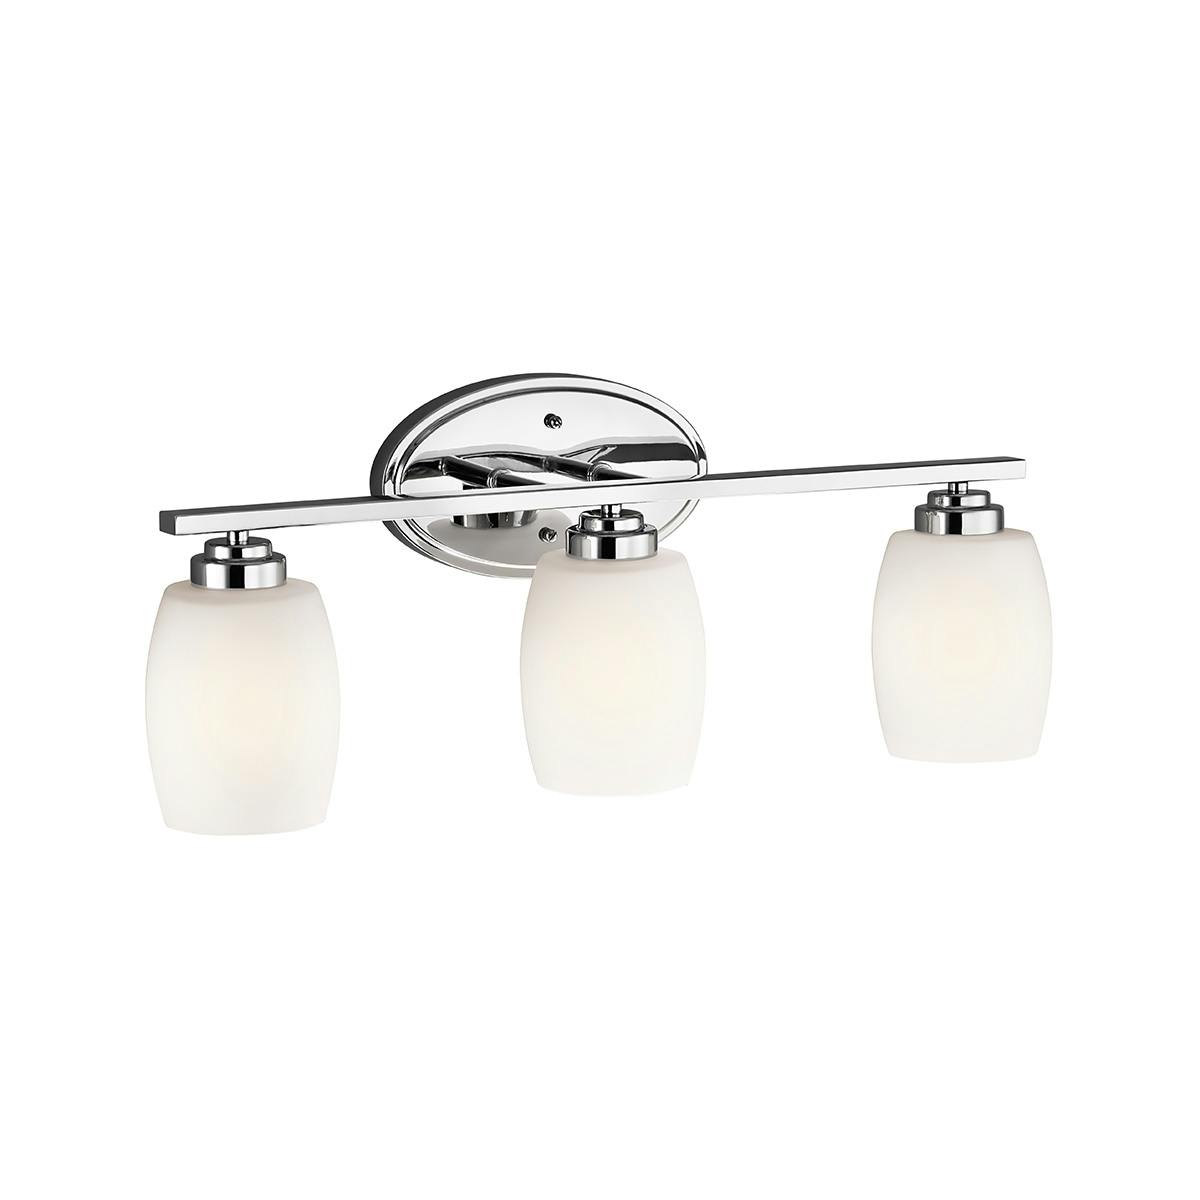 Poduct image of the Eileen vanity light 5098CH with the glass down